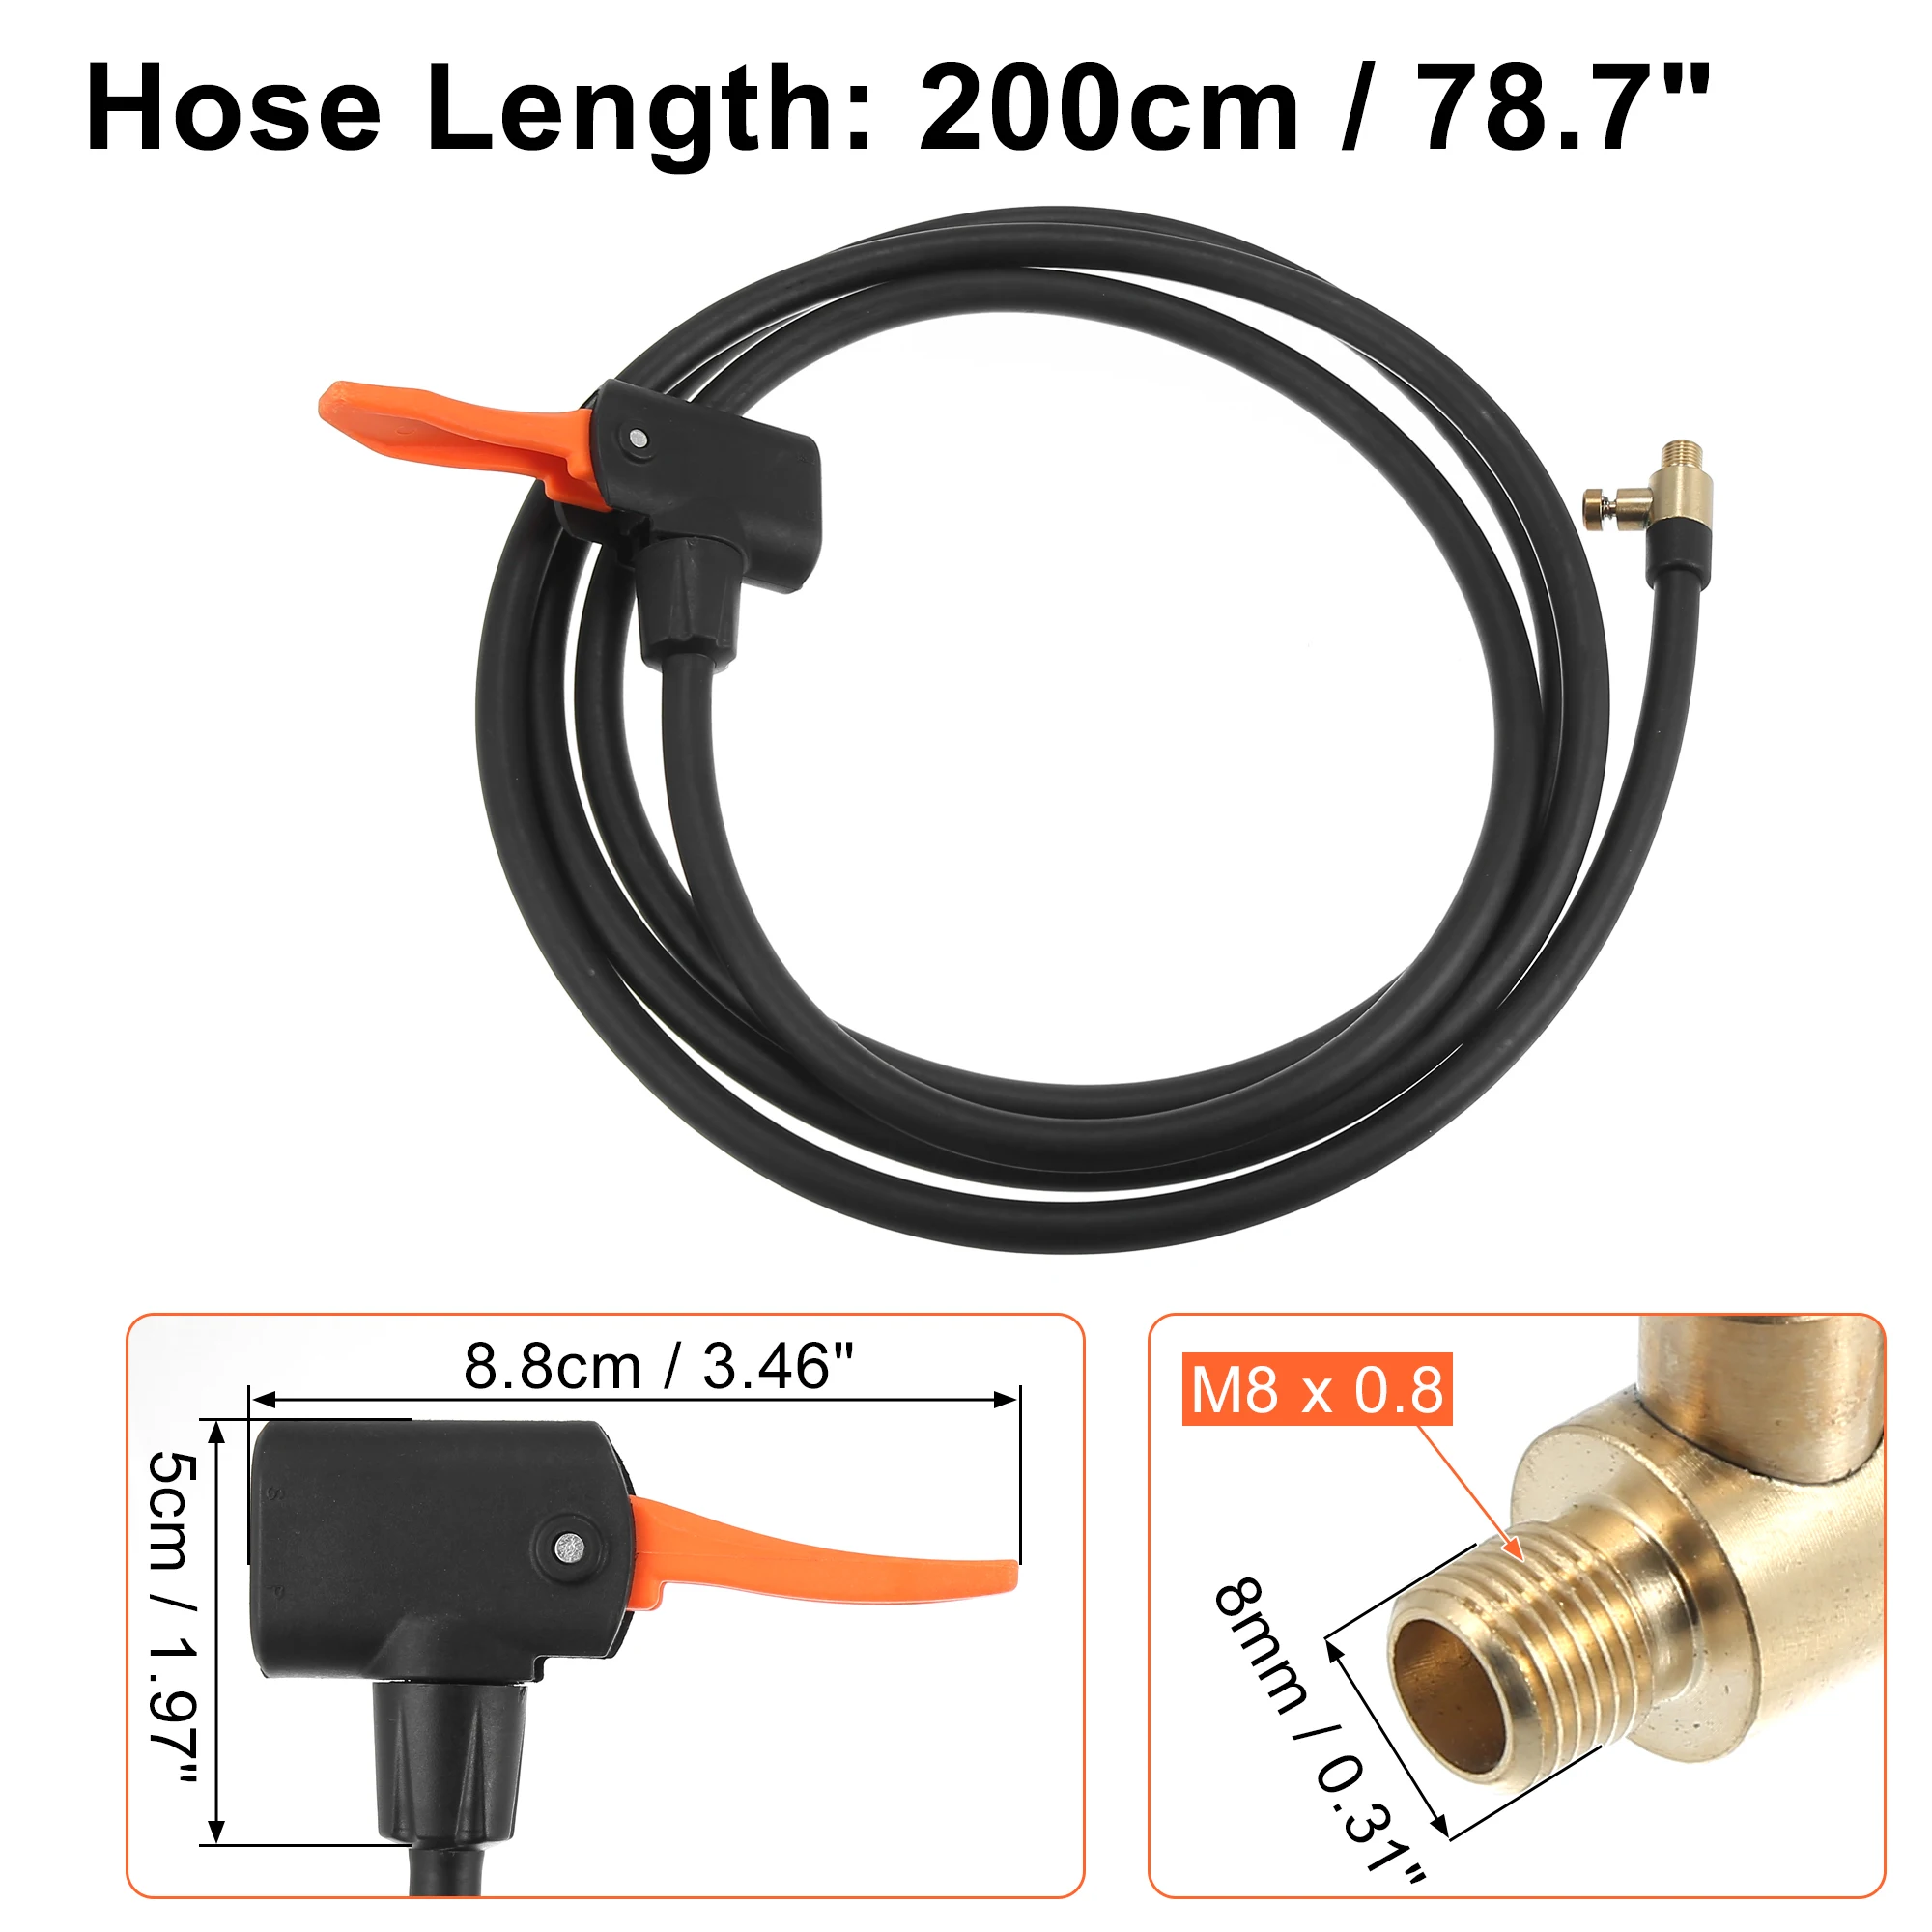 X AUTOHAUX 80cm Flexible Tire Inflator Extension Hose Tube Valve Adapter Replacement with Female Thread for Car 